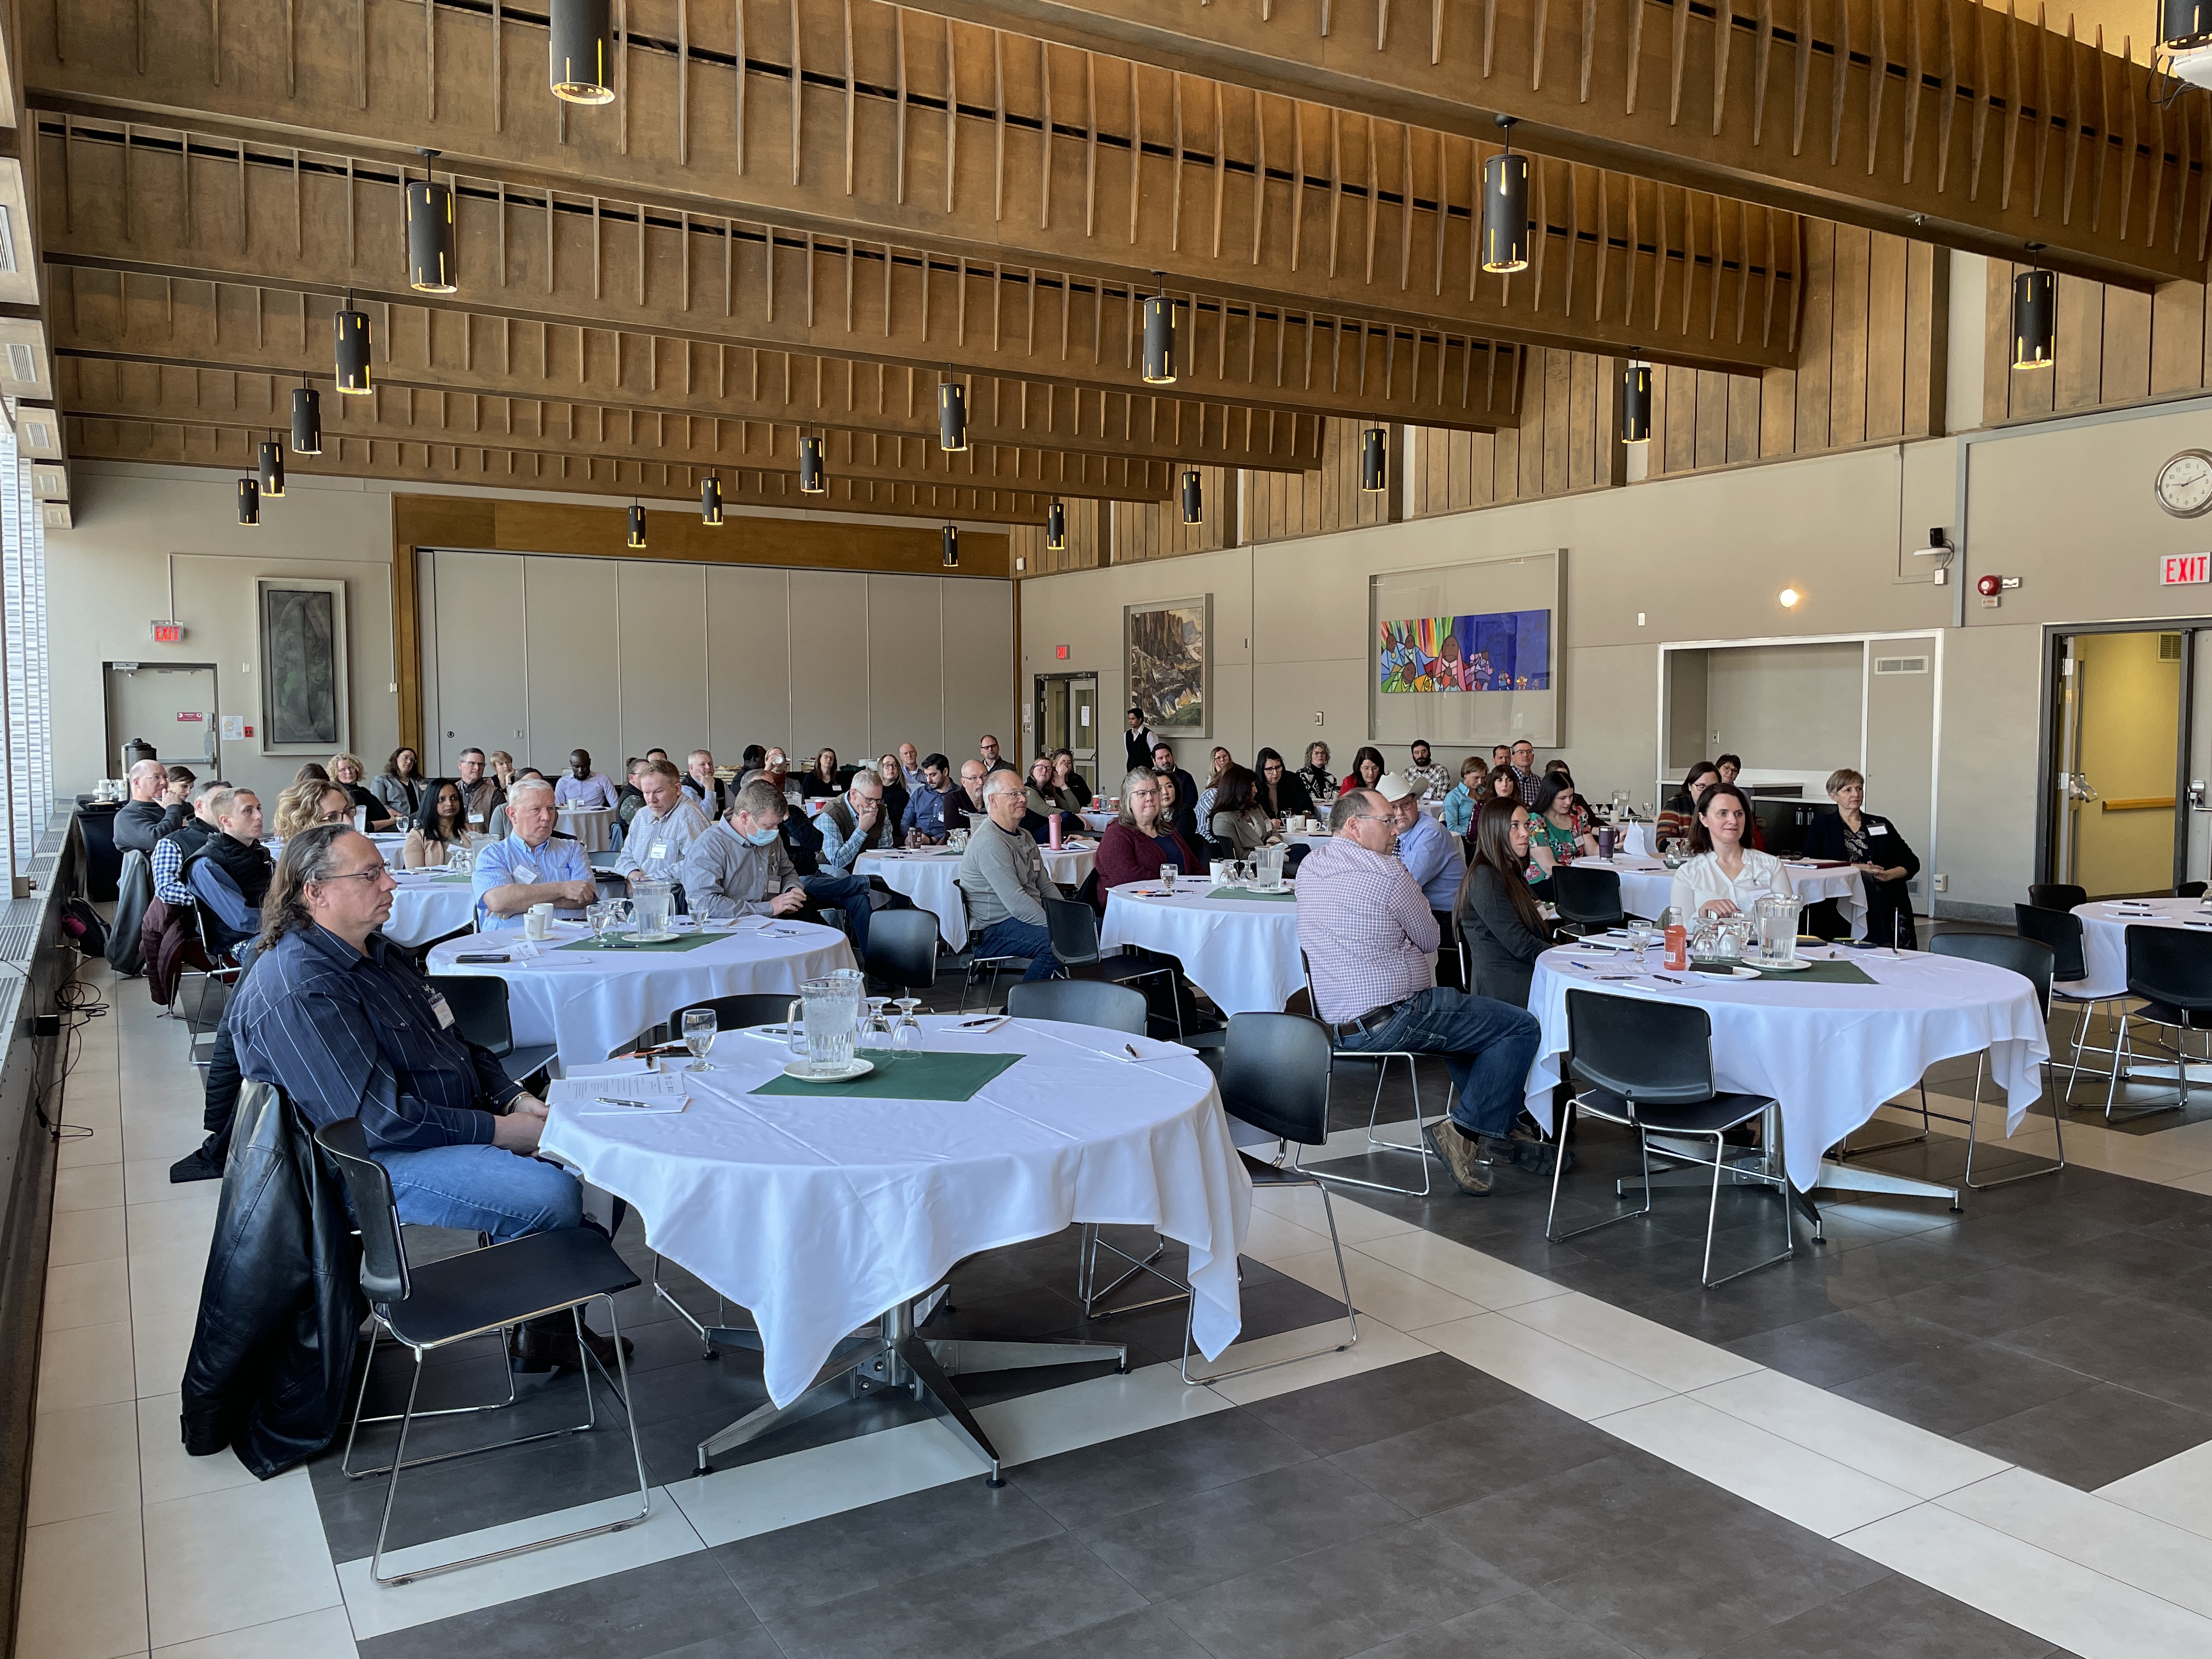 About 70 people attended the annual Beef and Forage Research Forum sponsored by the College of Agriculture and Bioresources, the Livestock and Forage Centre of Excellence, the Saskatchewan Cattlemen’s Association and the Government of Saskatchewan.